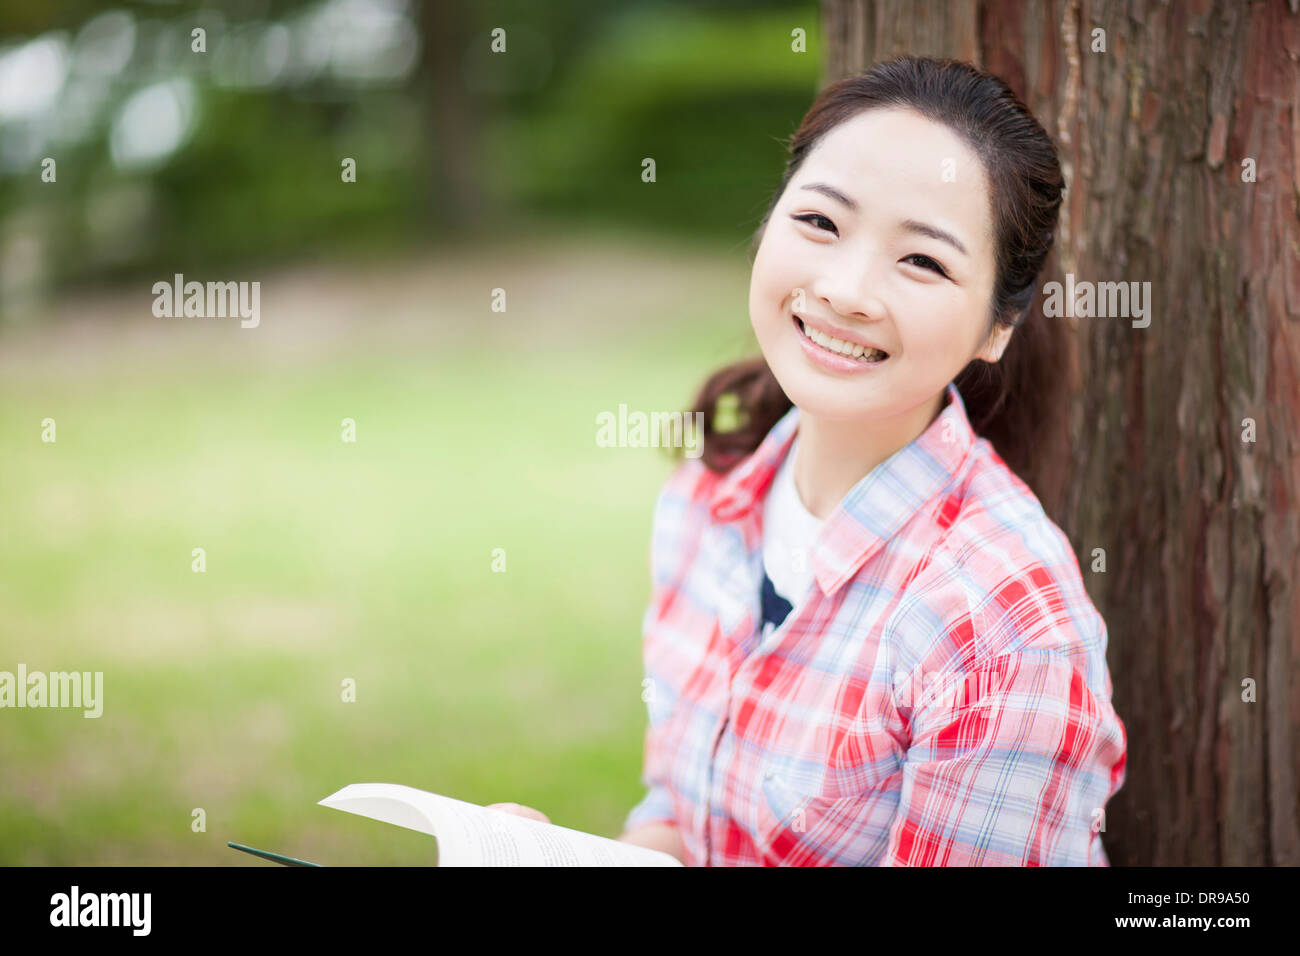 a woman leaning on tree reading a book Stock Photo